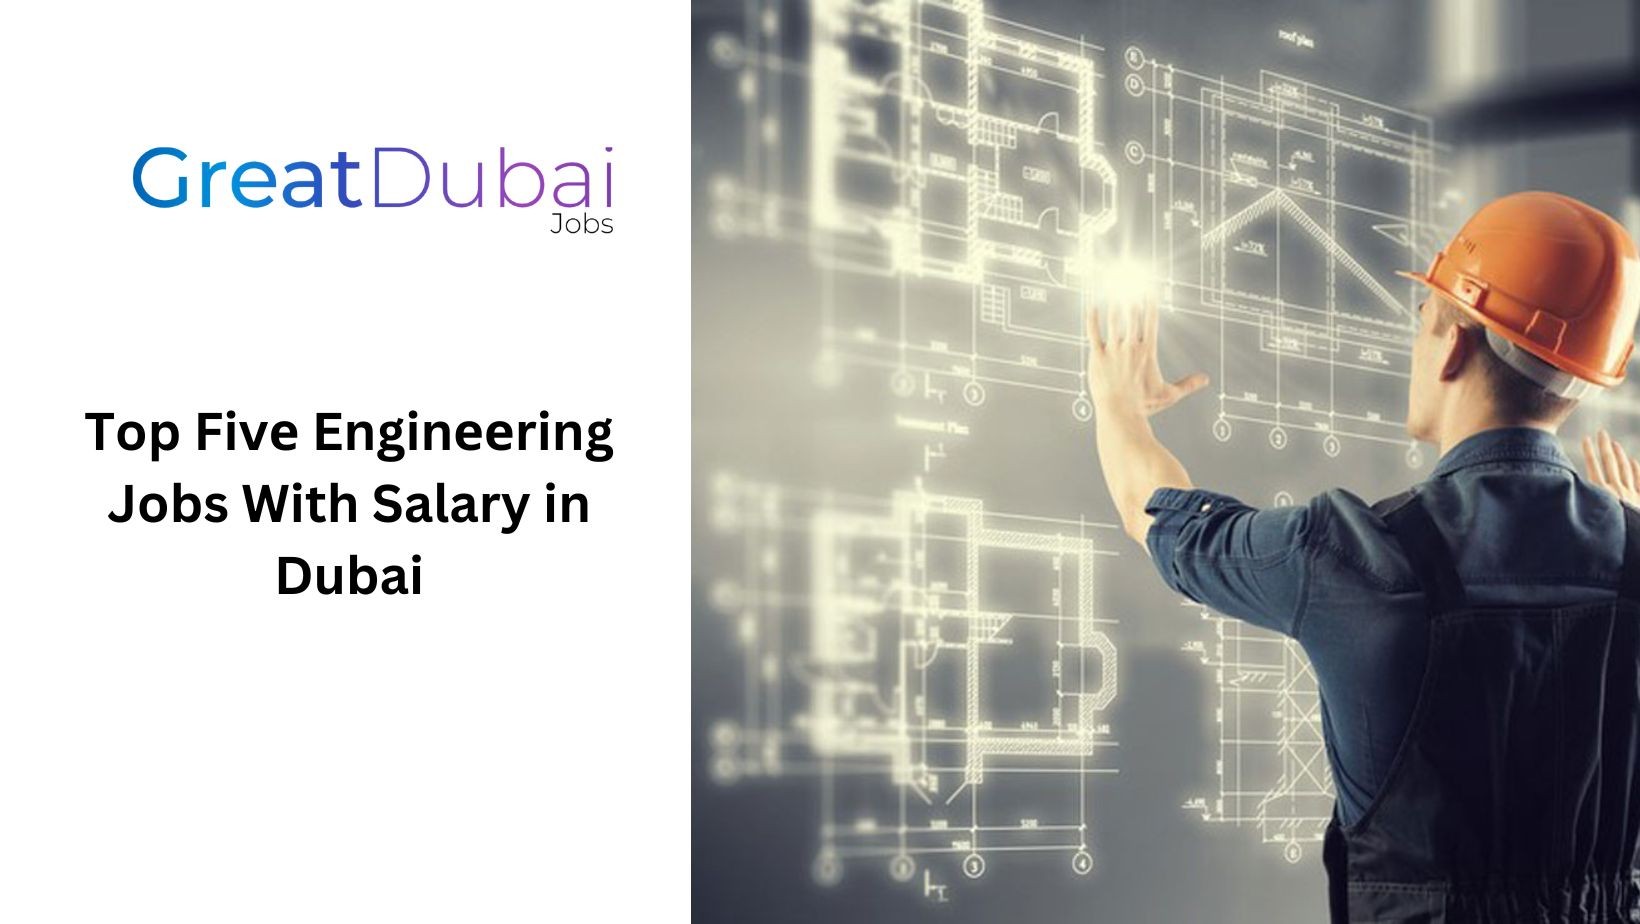 Top Fivе Enginееring Jobs With Salary in Dubai